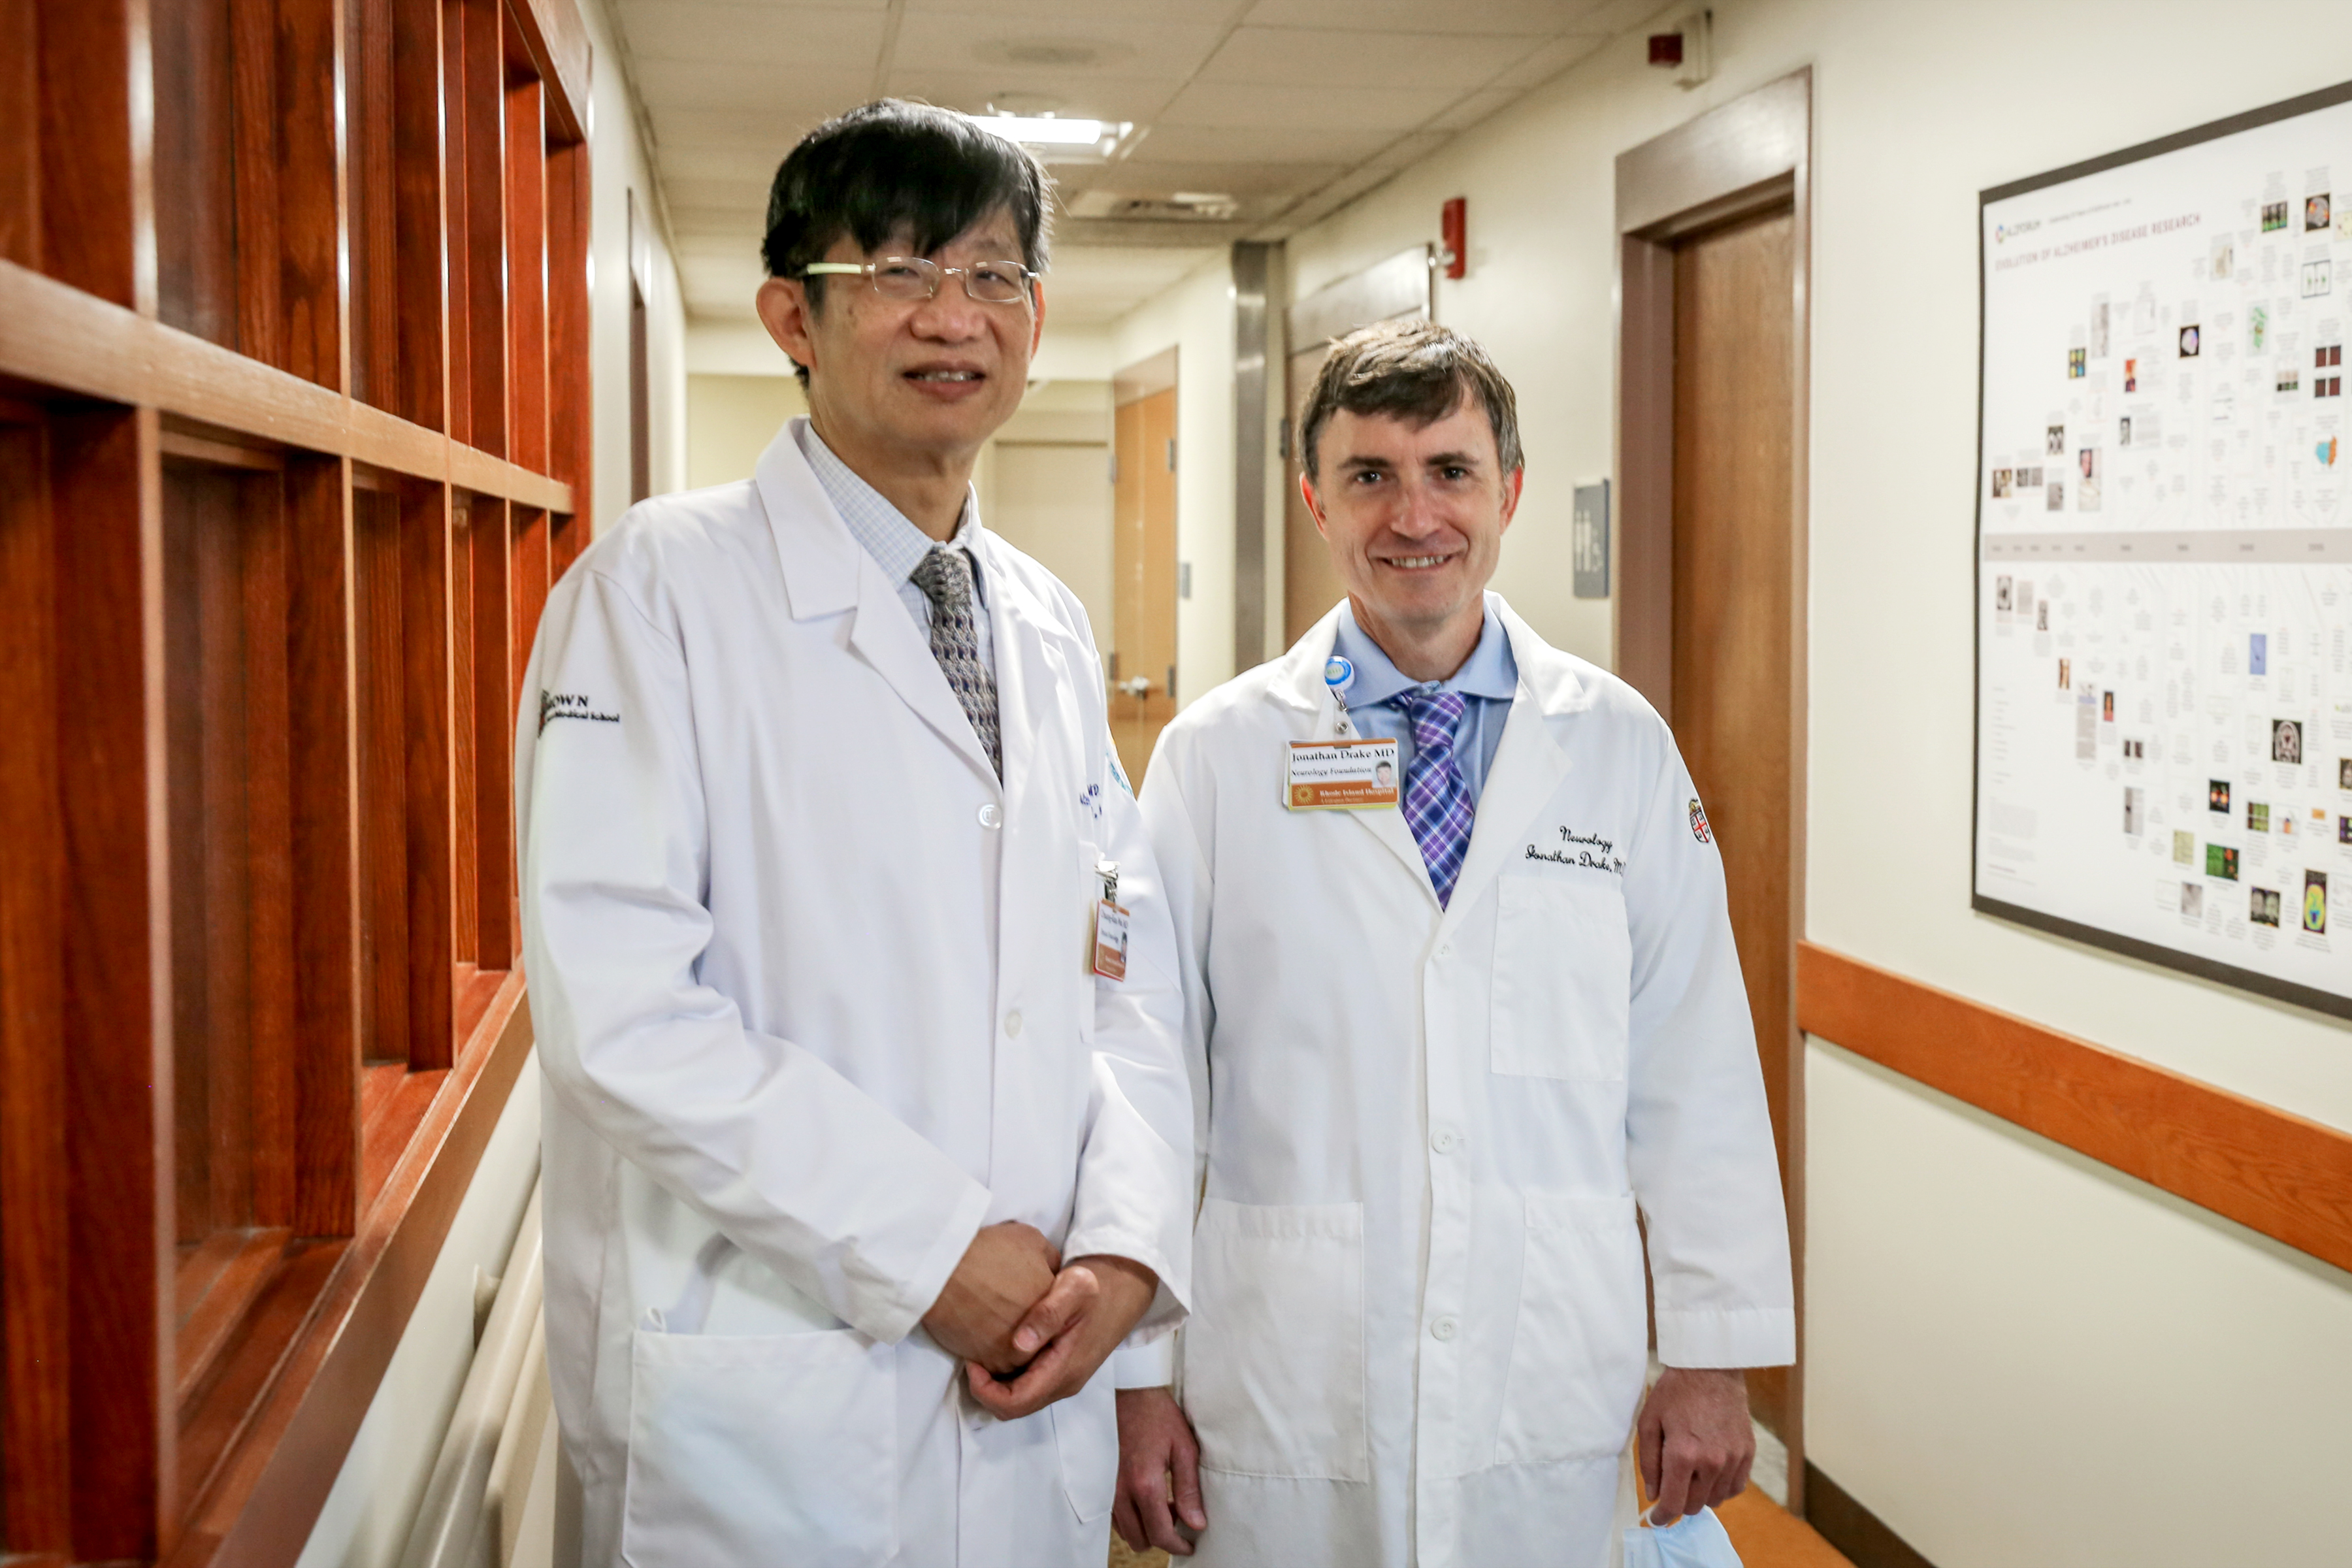 Rhode Island Hospital's Drs. Wu and Drake discuss Alzheimer's care and research during COVID-19